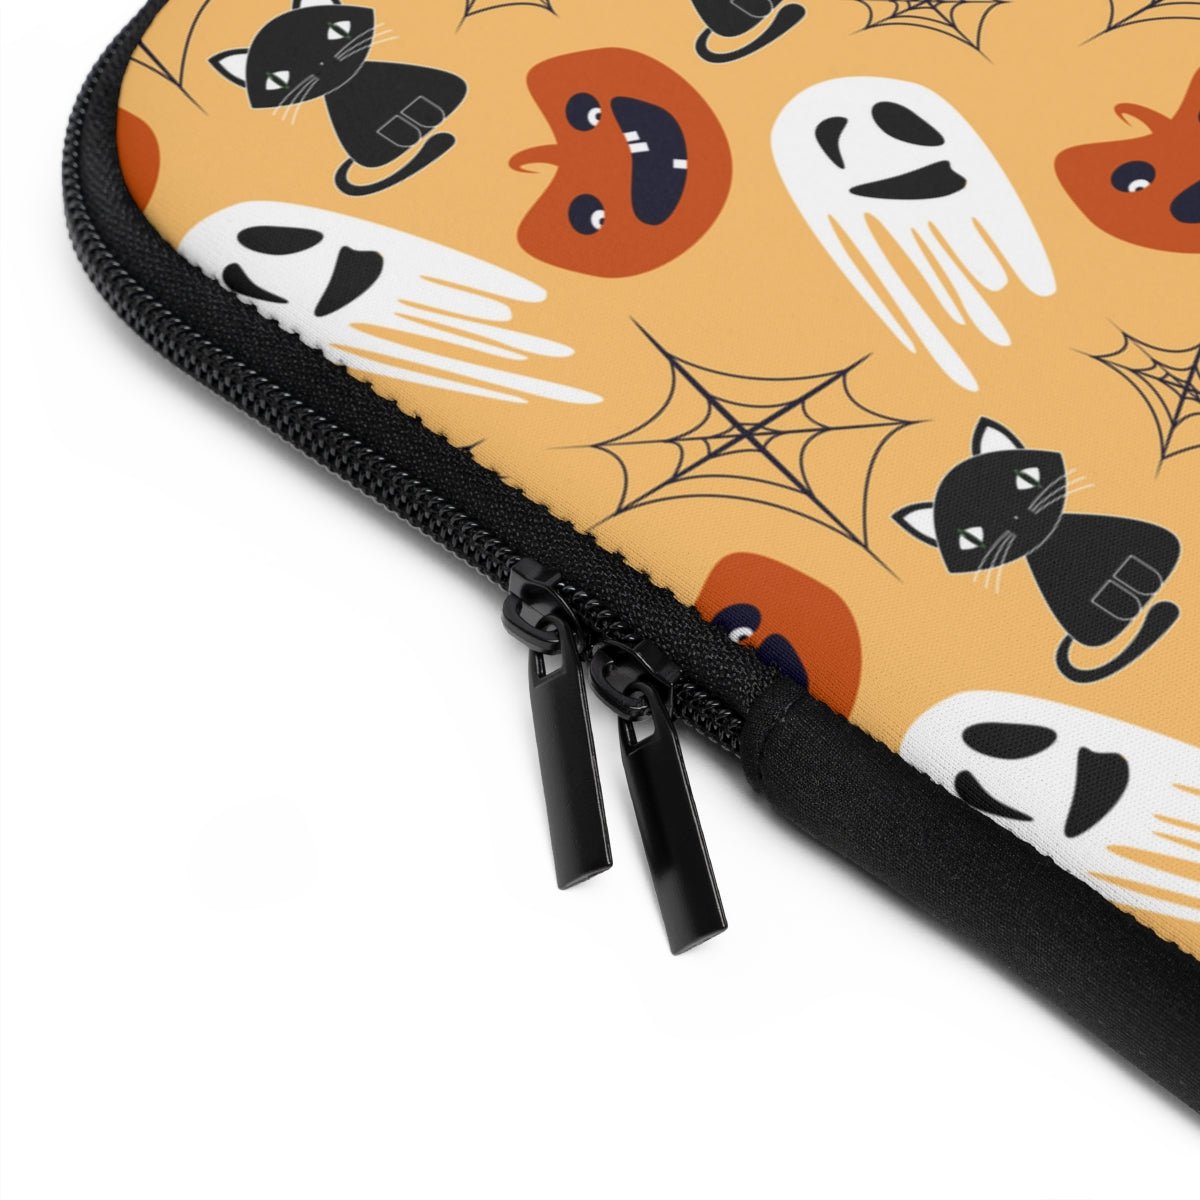 Halloween Cats and Ghosts Laptop Sleeve - Puffin Lime